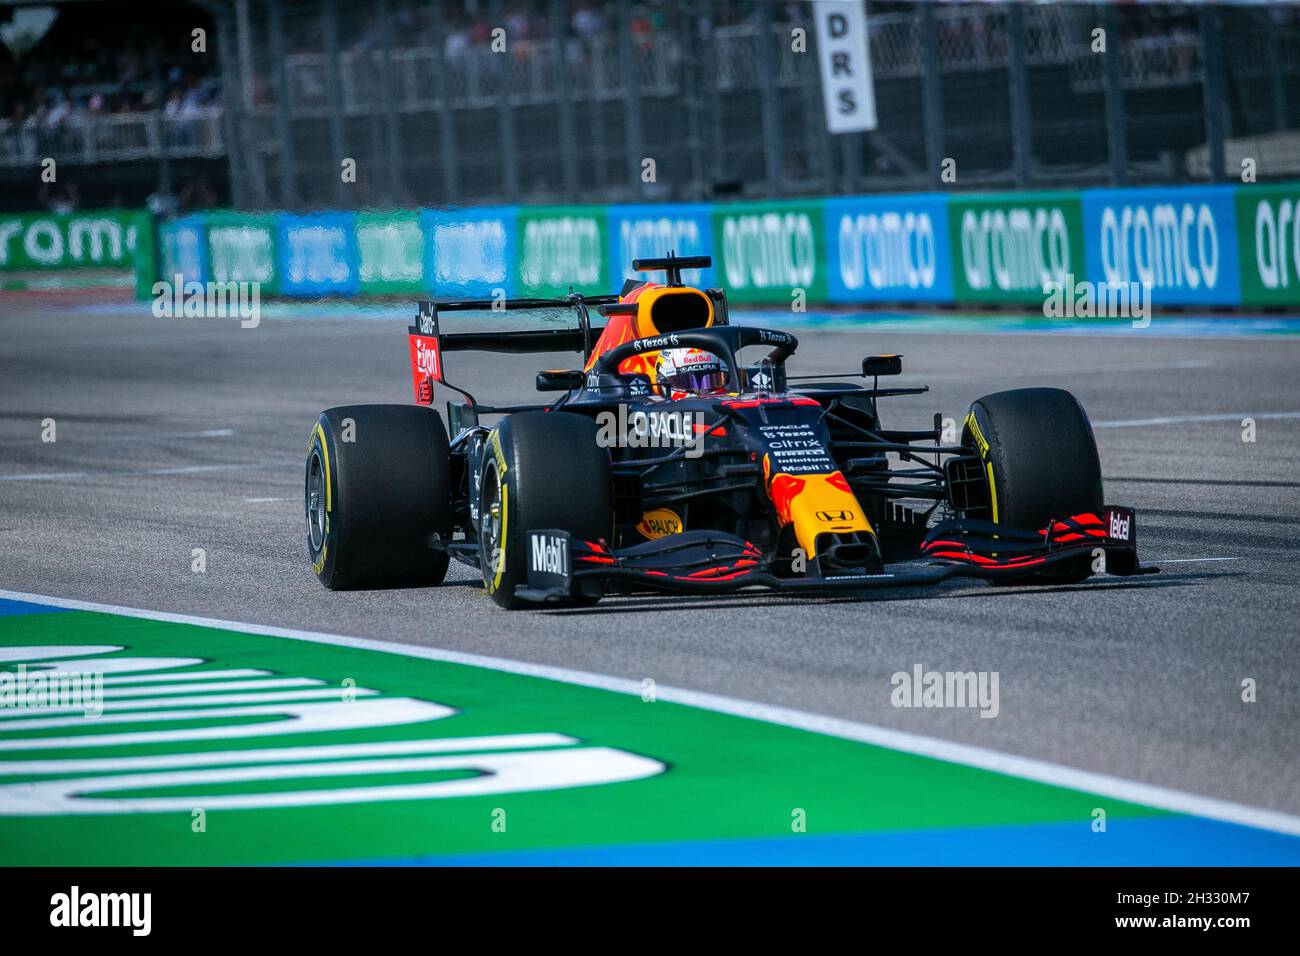 #33 Max Verstappen NED (Red Bull Racing Honda) drives during the race at the Formula Aramco United States Grand Prix 2021 at Circuit of the Americas in Austin TX on October 24, 2021 (Photo by Dave Clements/Sipa USA) Stock Photo